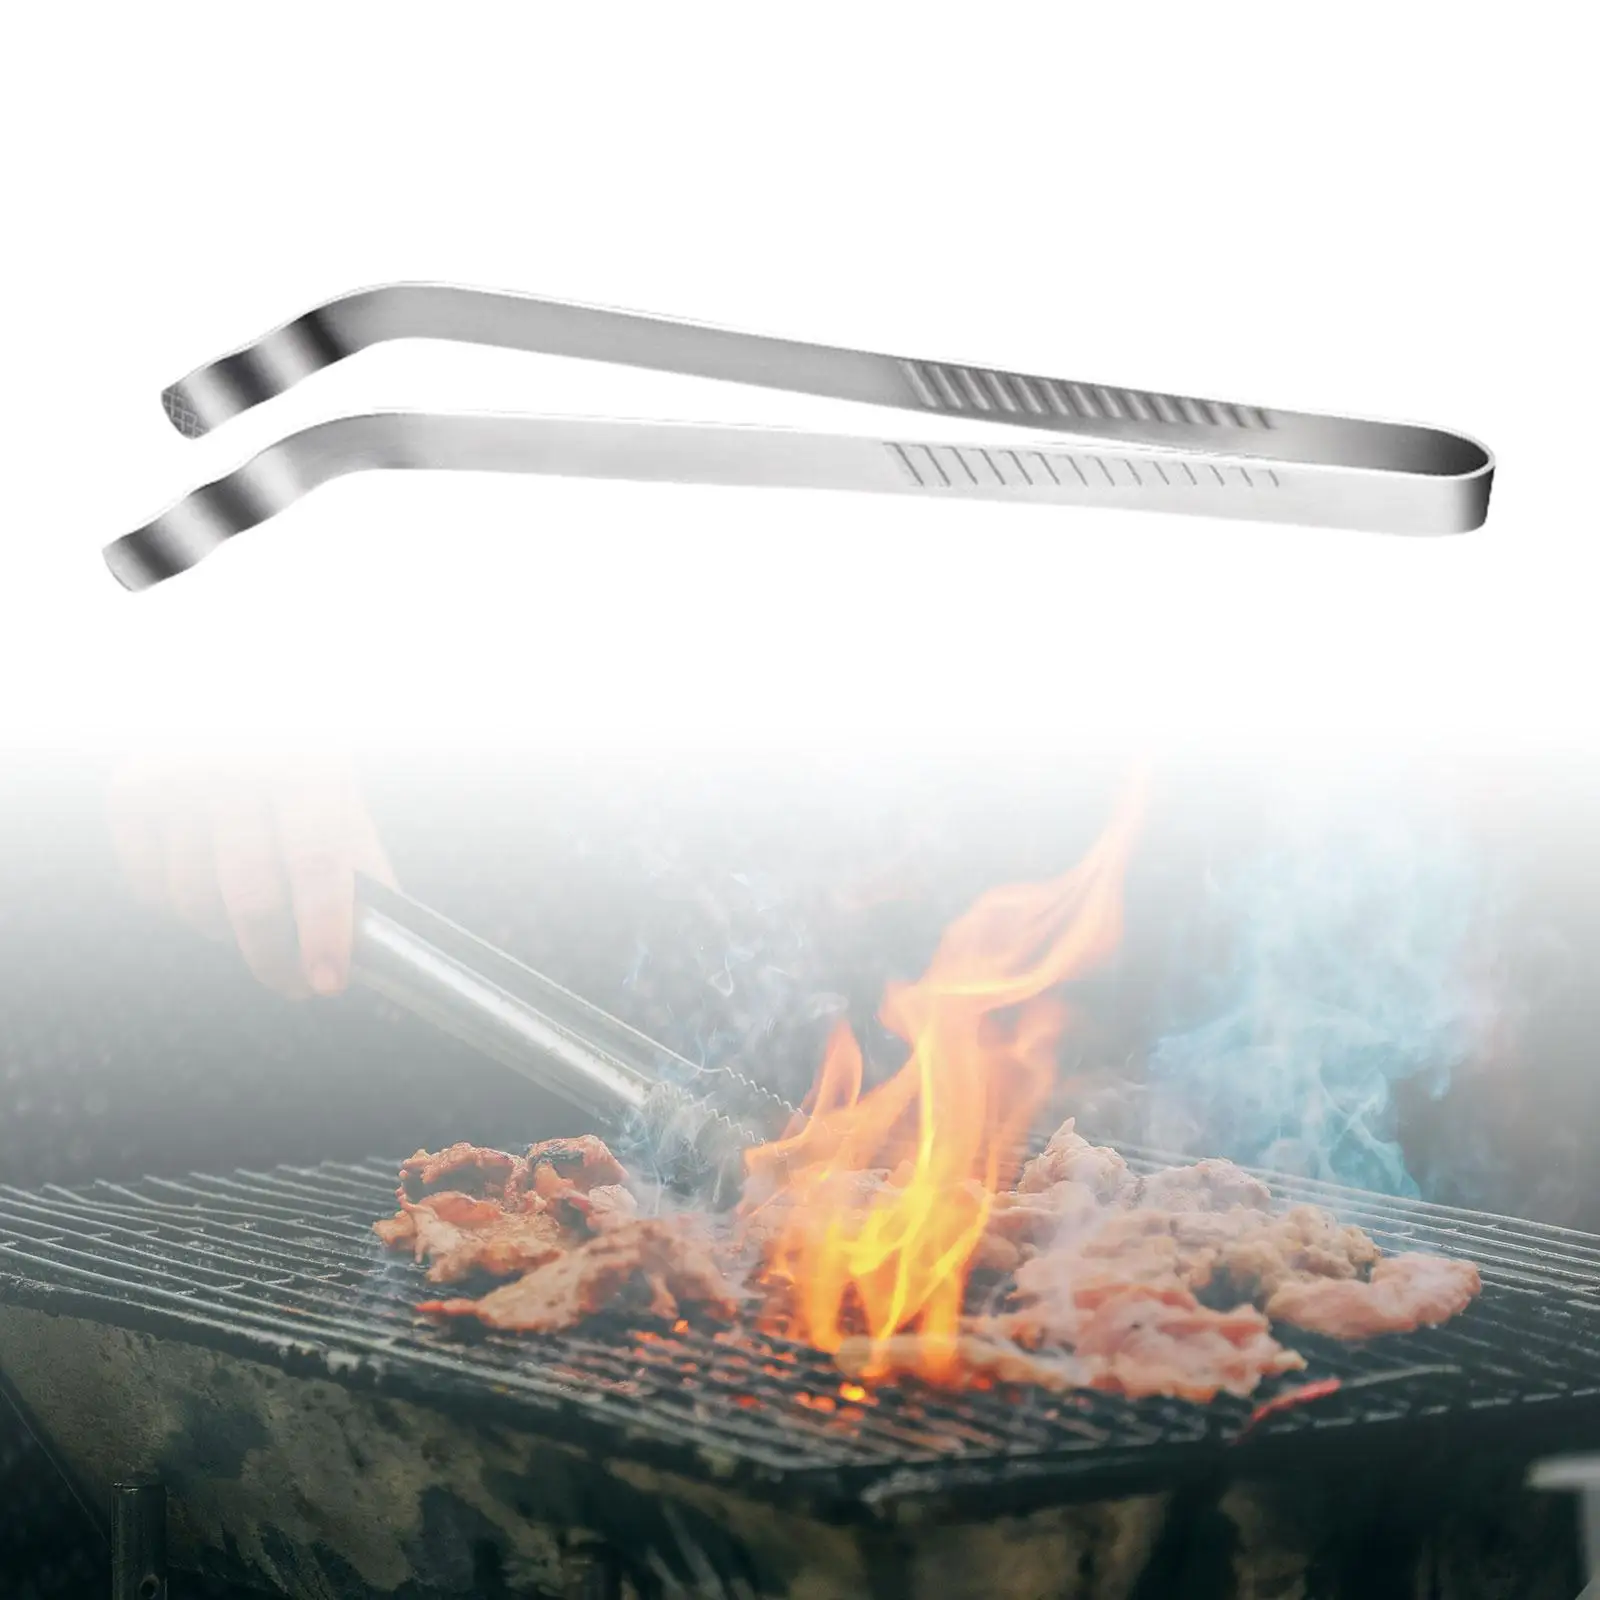 Steak Tongs Serving Tongs Long Handle Kitchen Utensils Kitchen Cooking Tool Kitchen Tongs for Salad Bread BBQ Noodles